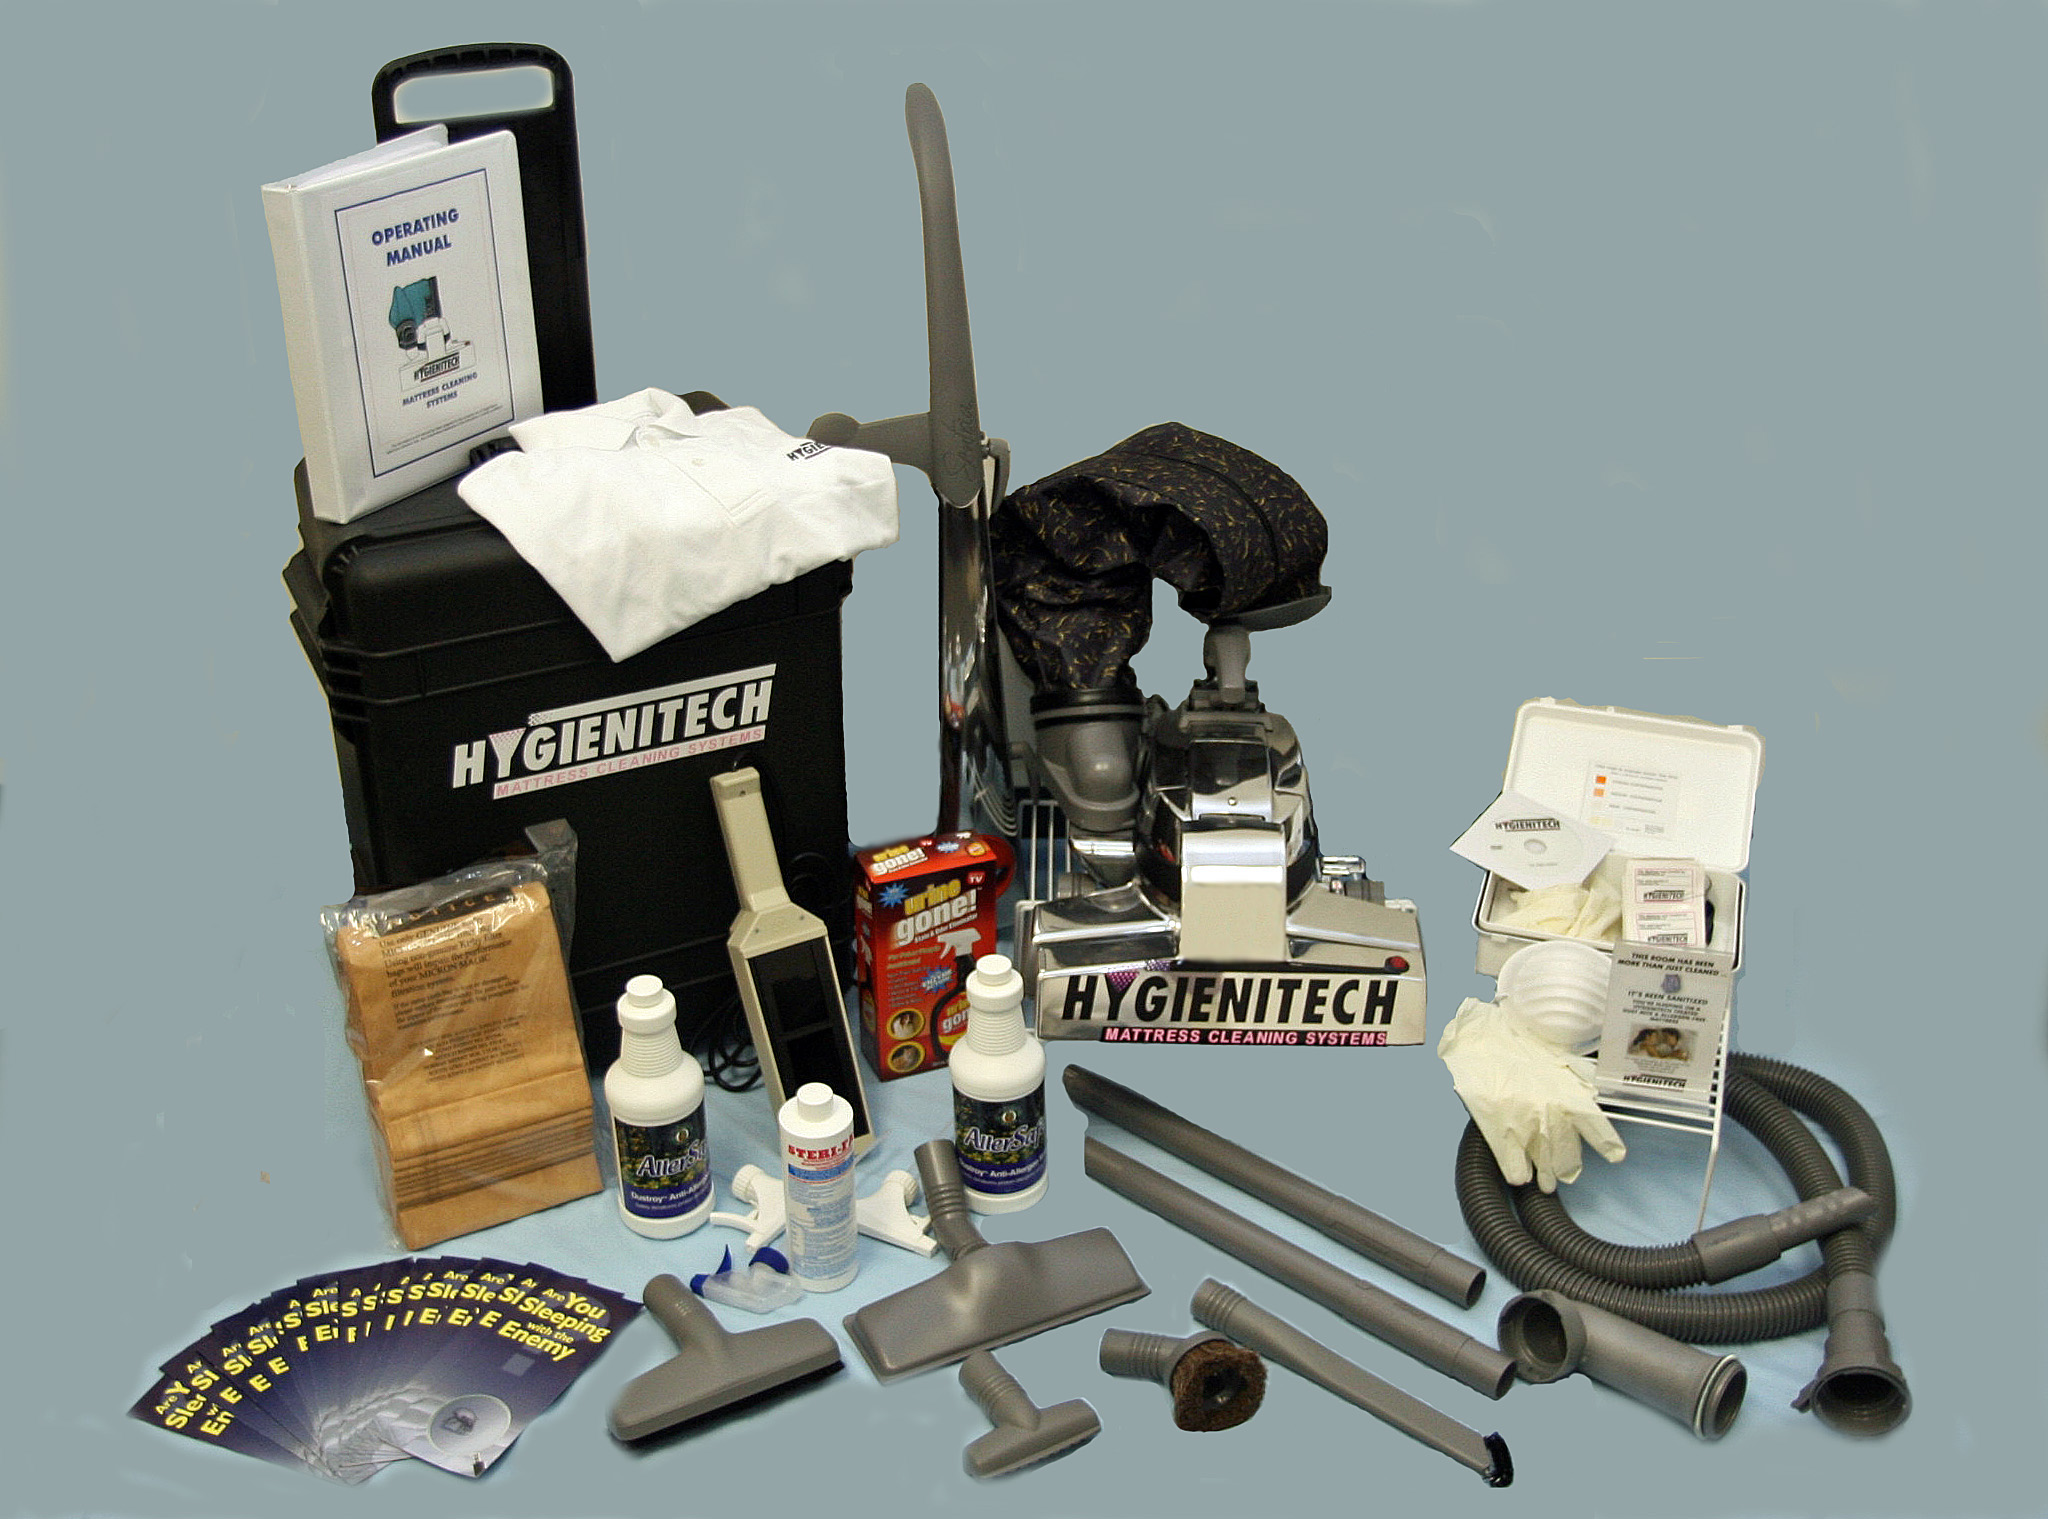 The Hygienitech Equipment Package